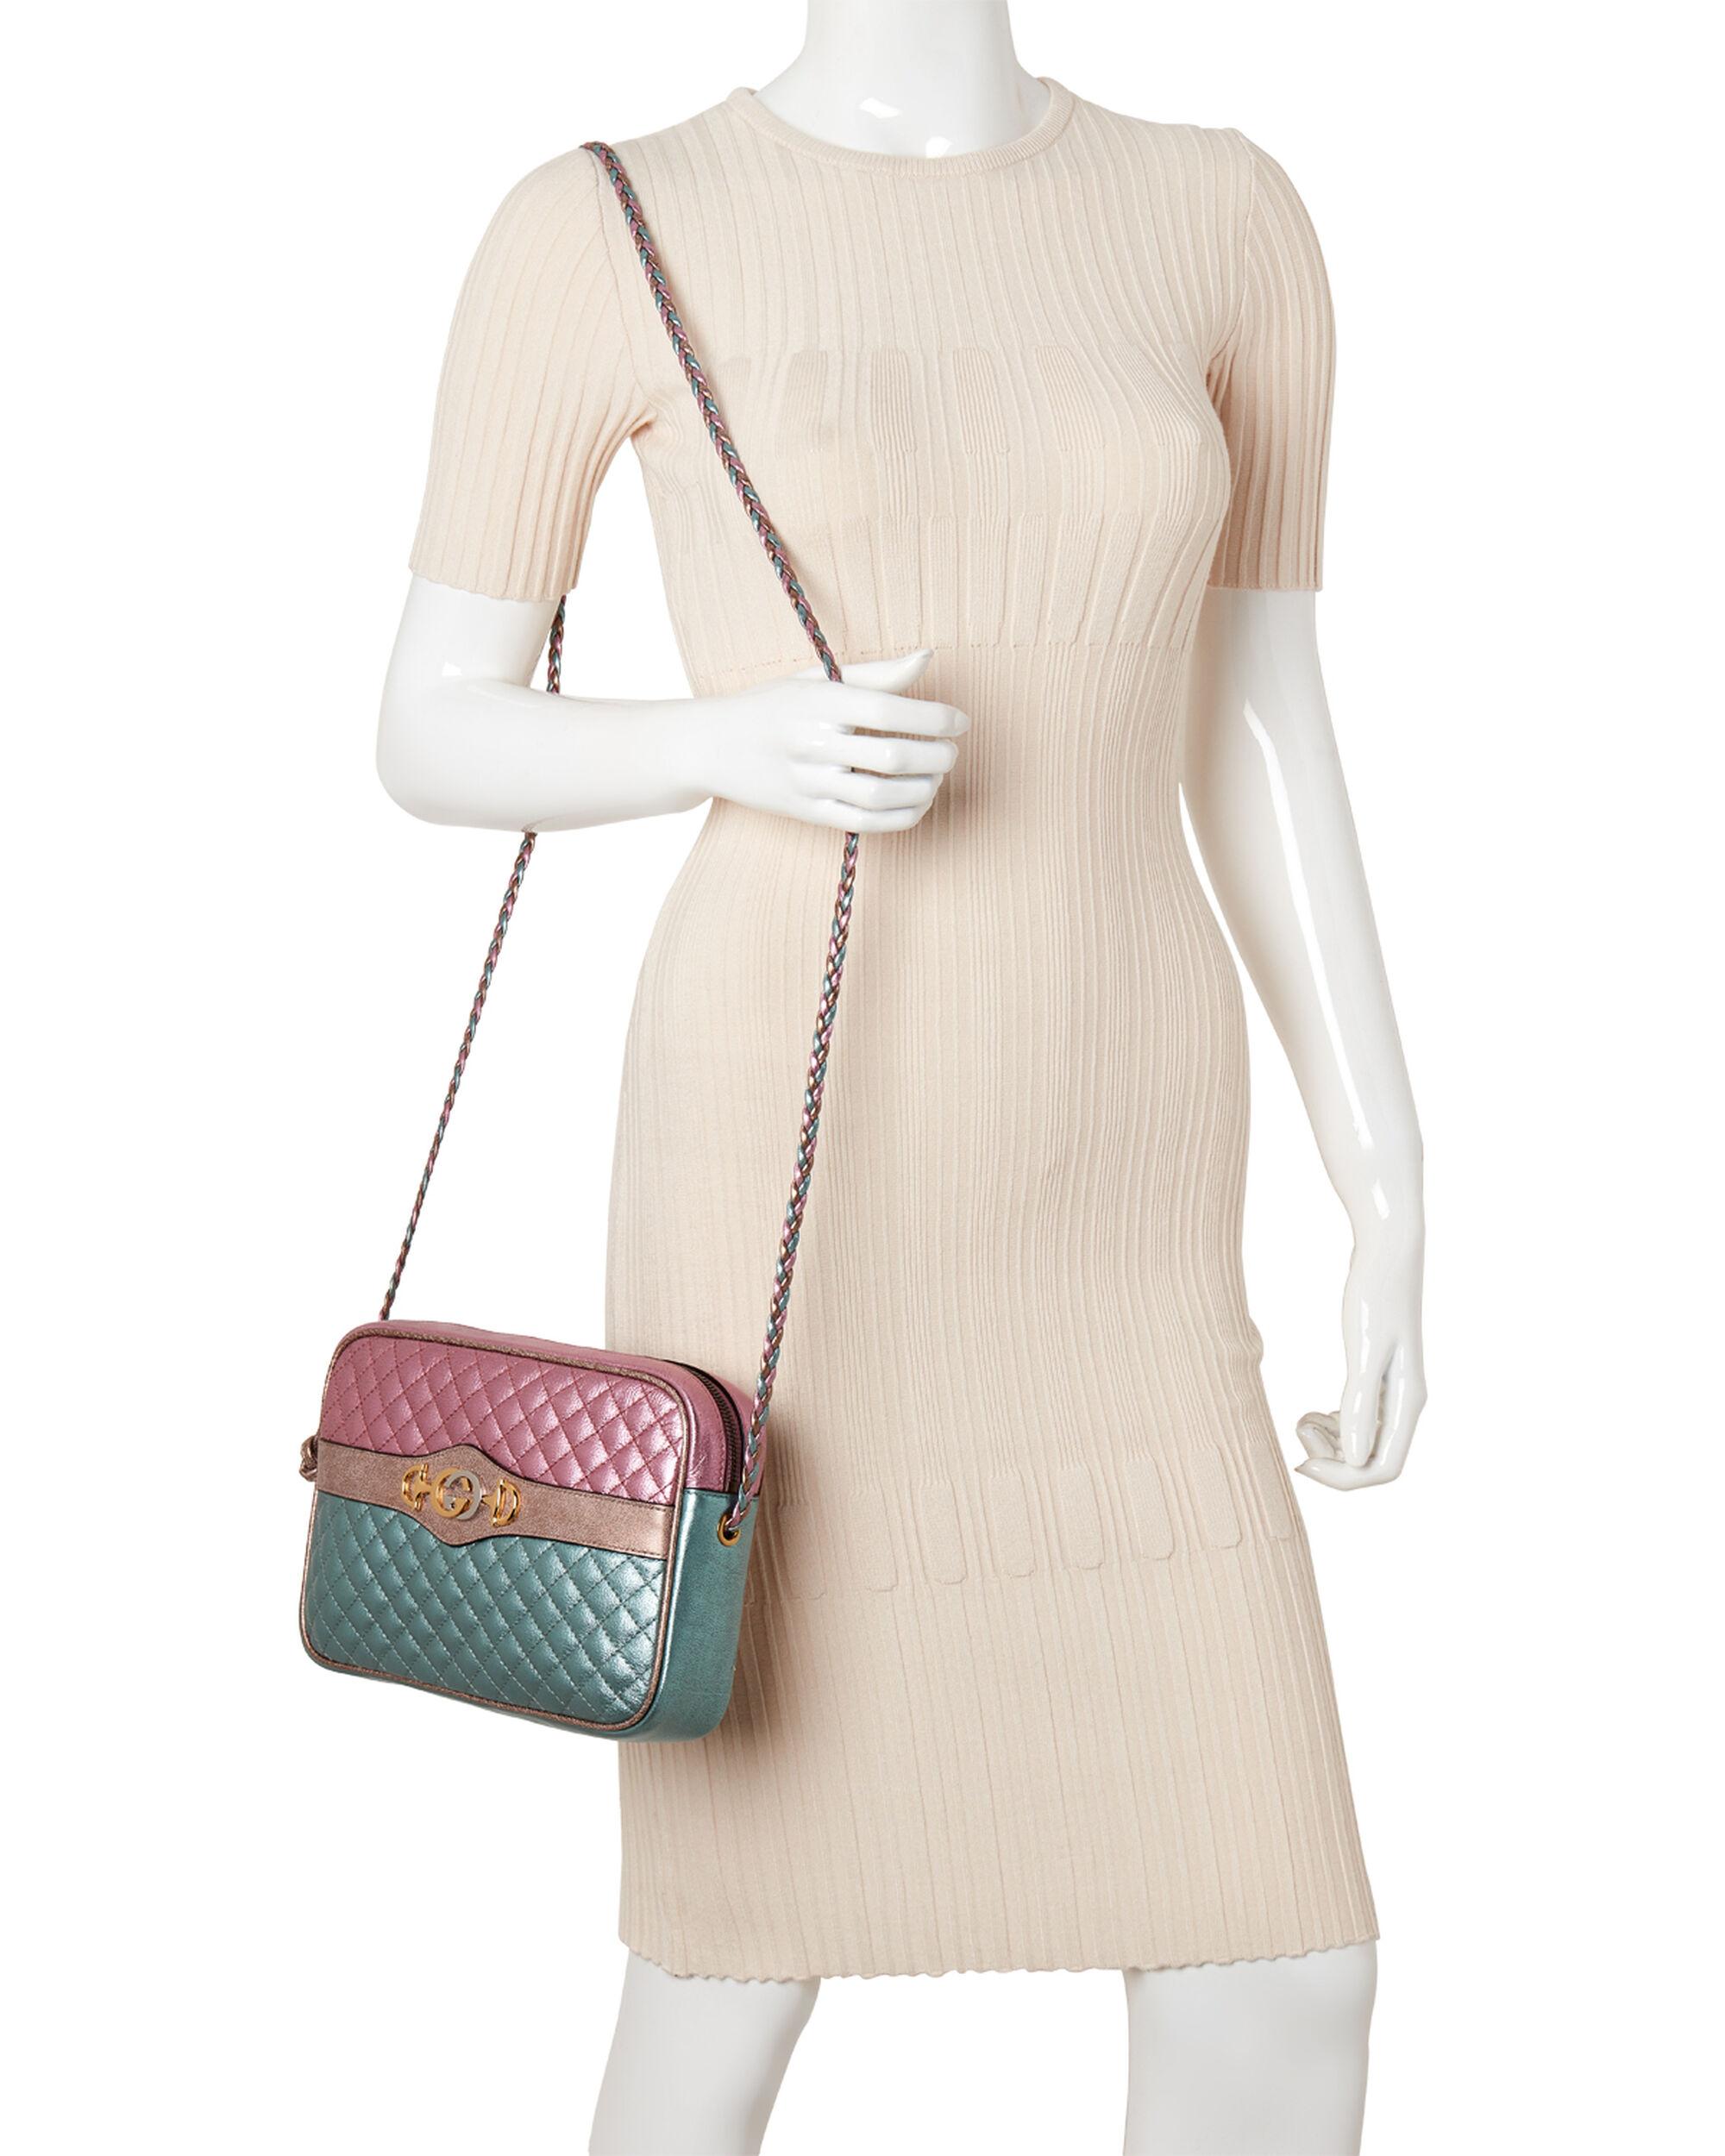 Gucci Pink & Blue Laminated Leather Small Shoulder Bag in Pink - Lyst